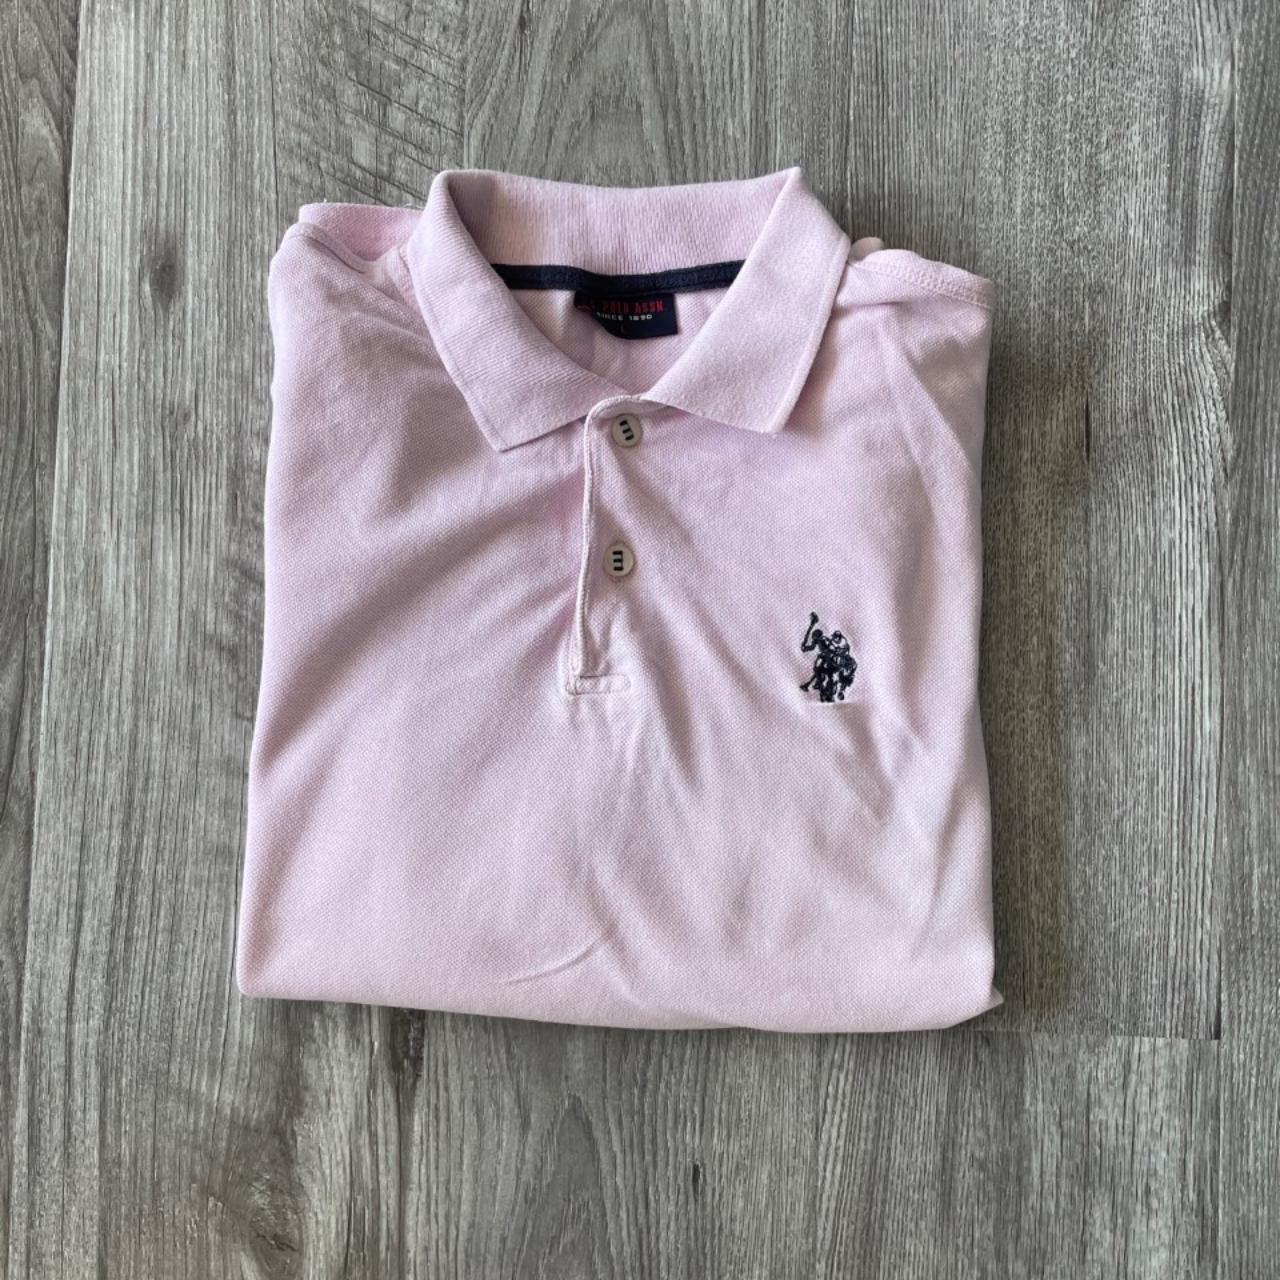 U.S. Polo Assn. Men's Pink and Navy Polo-shirts (2)